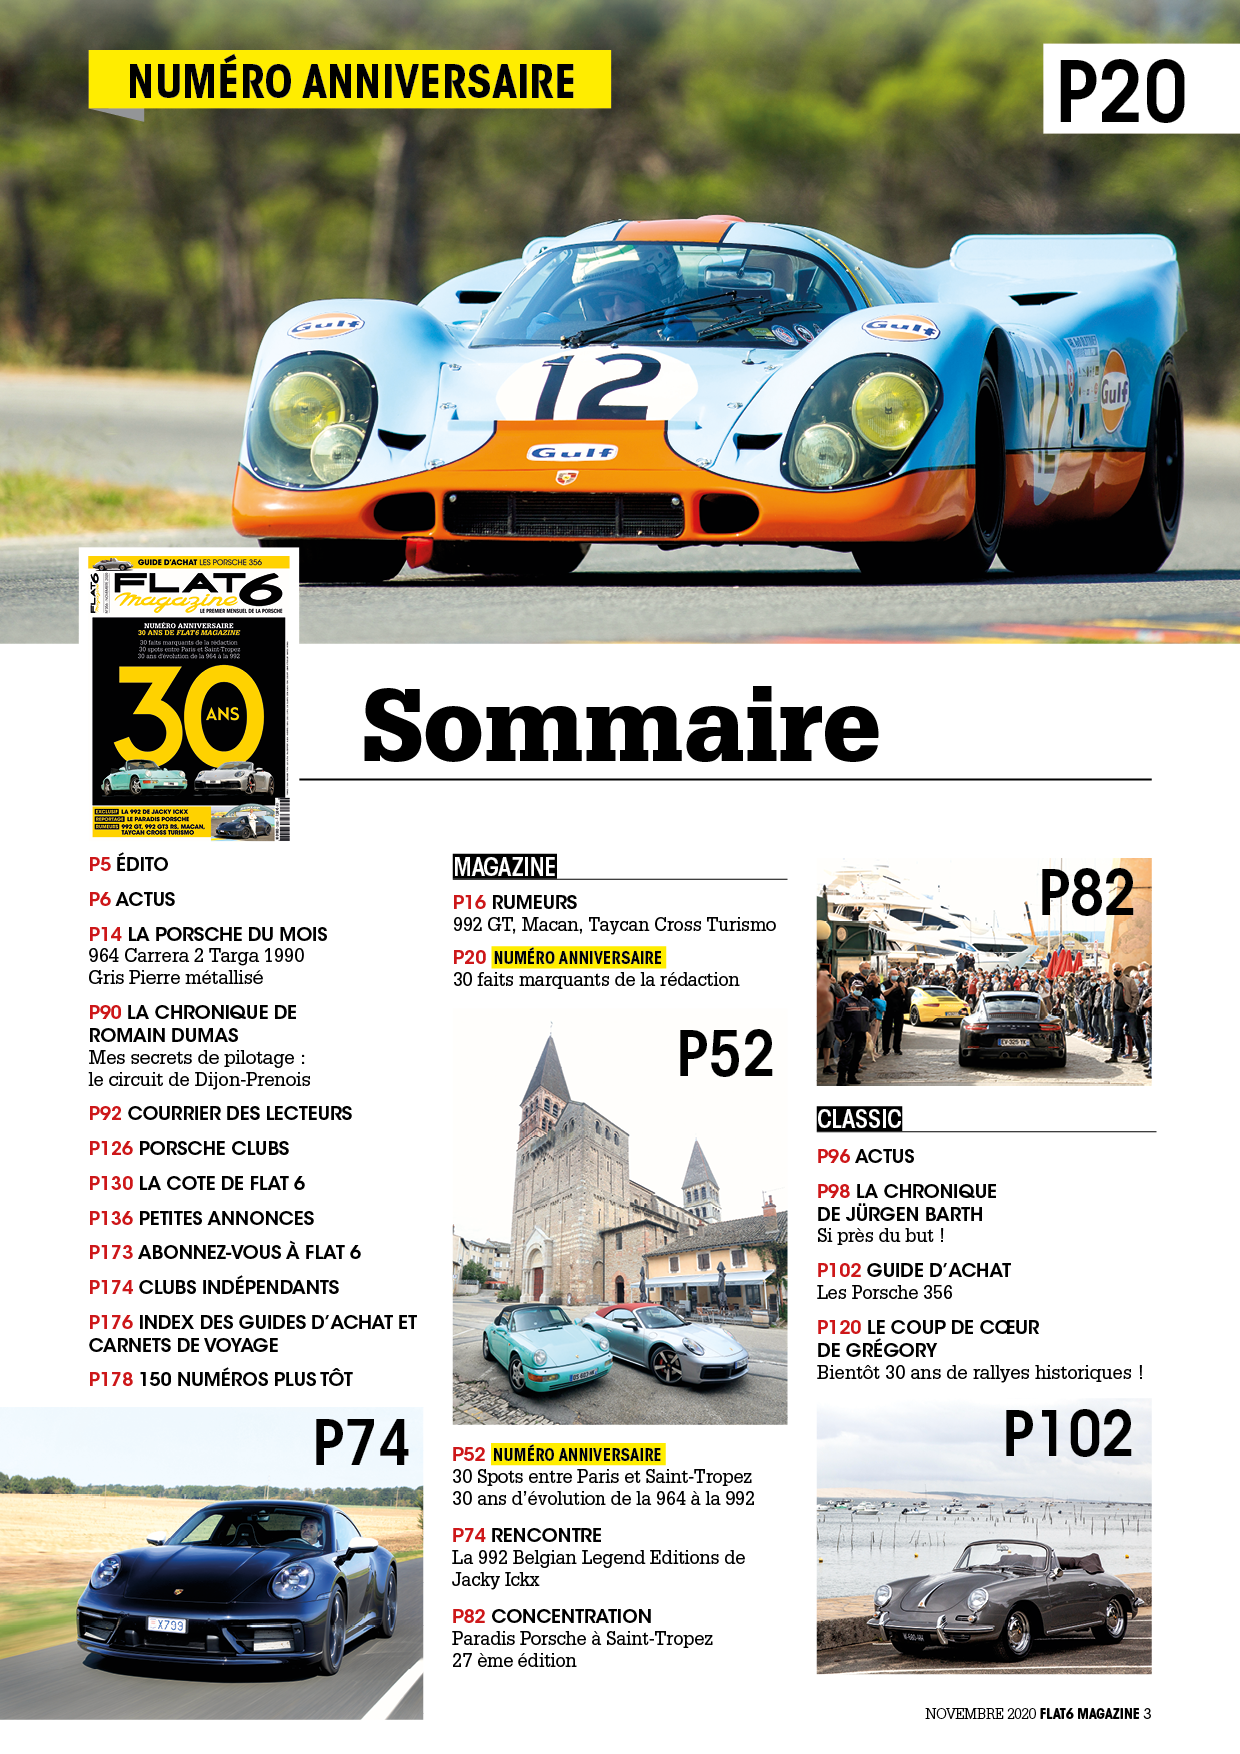 Sommaire356